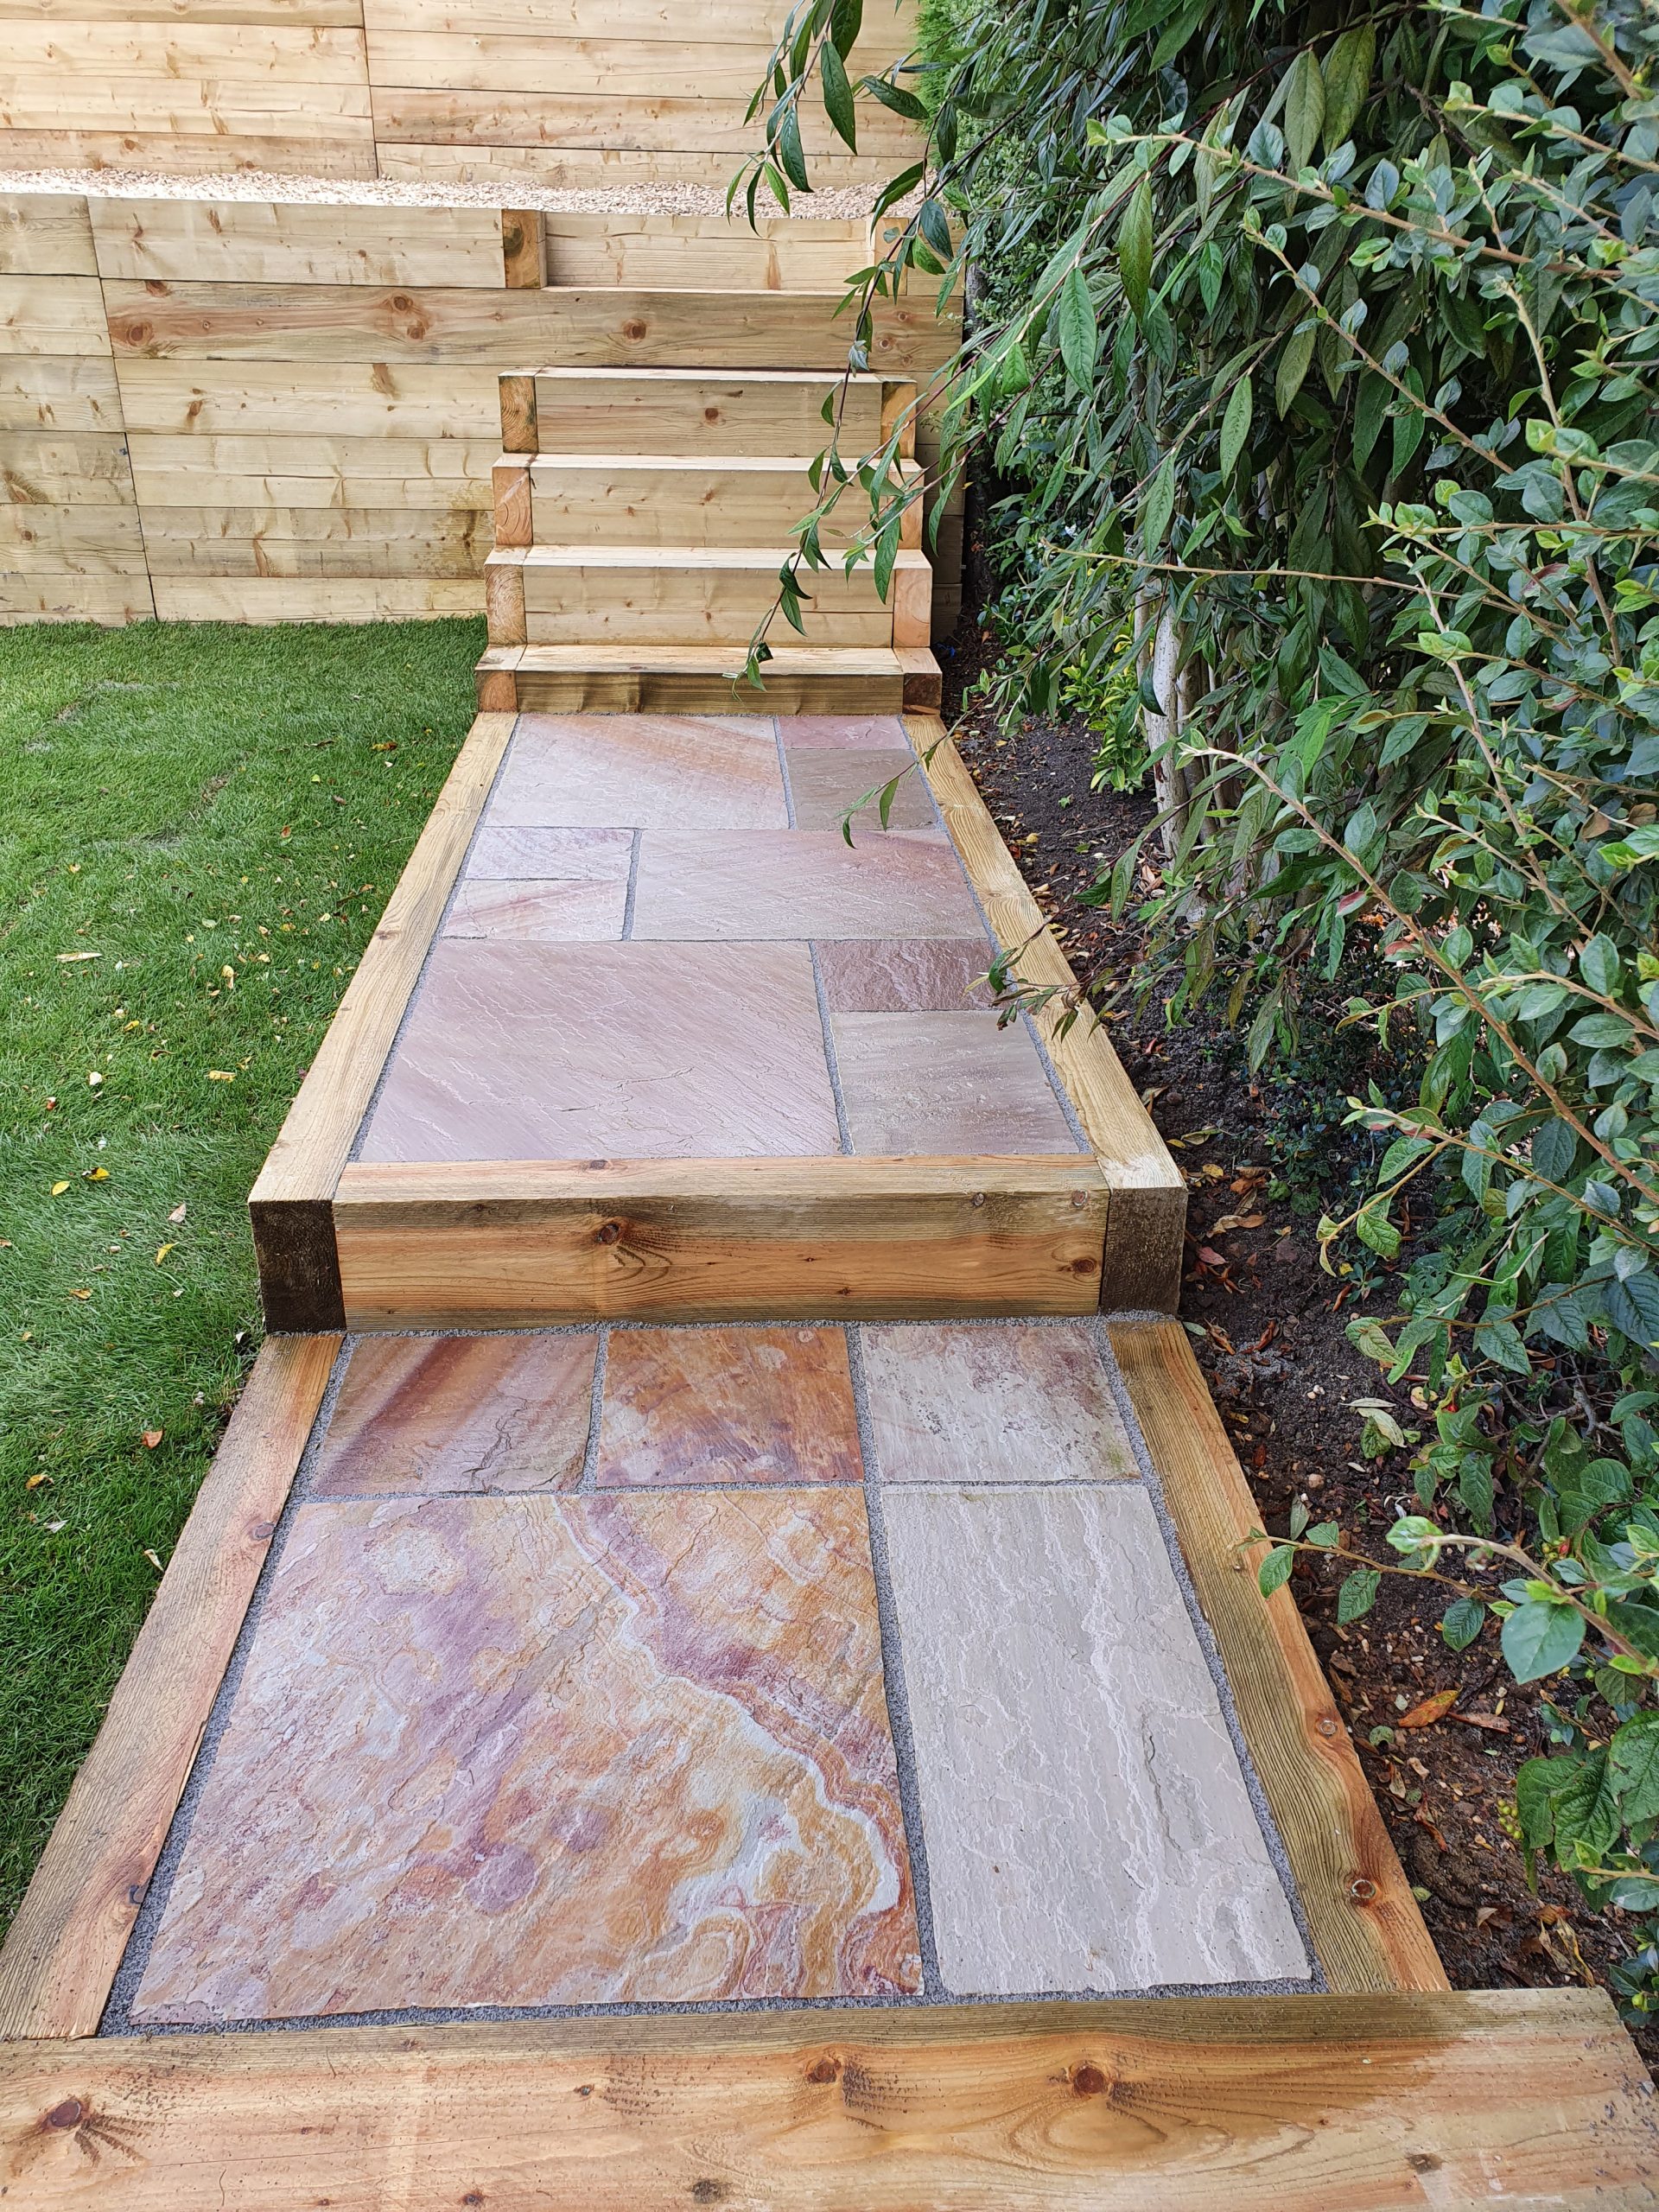 Tiered multi level garden wooden sleeper retainer walls, steps and newly laid turf